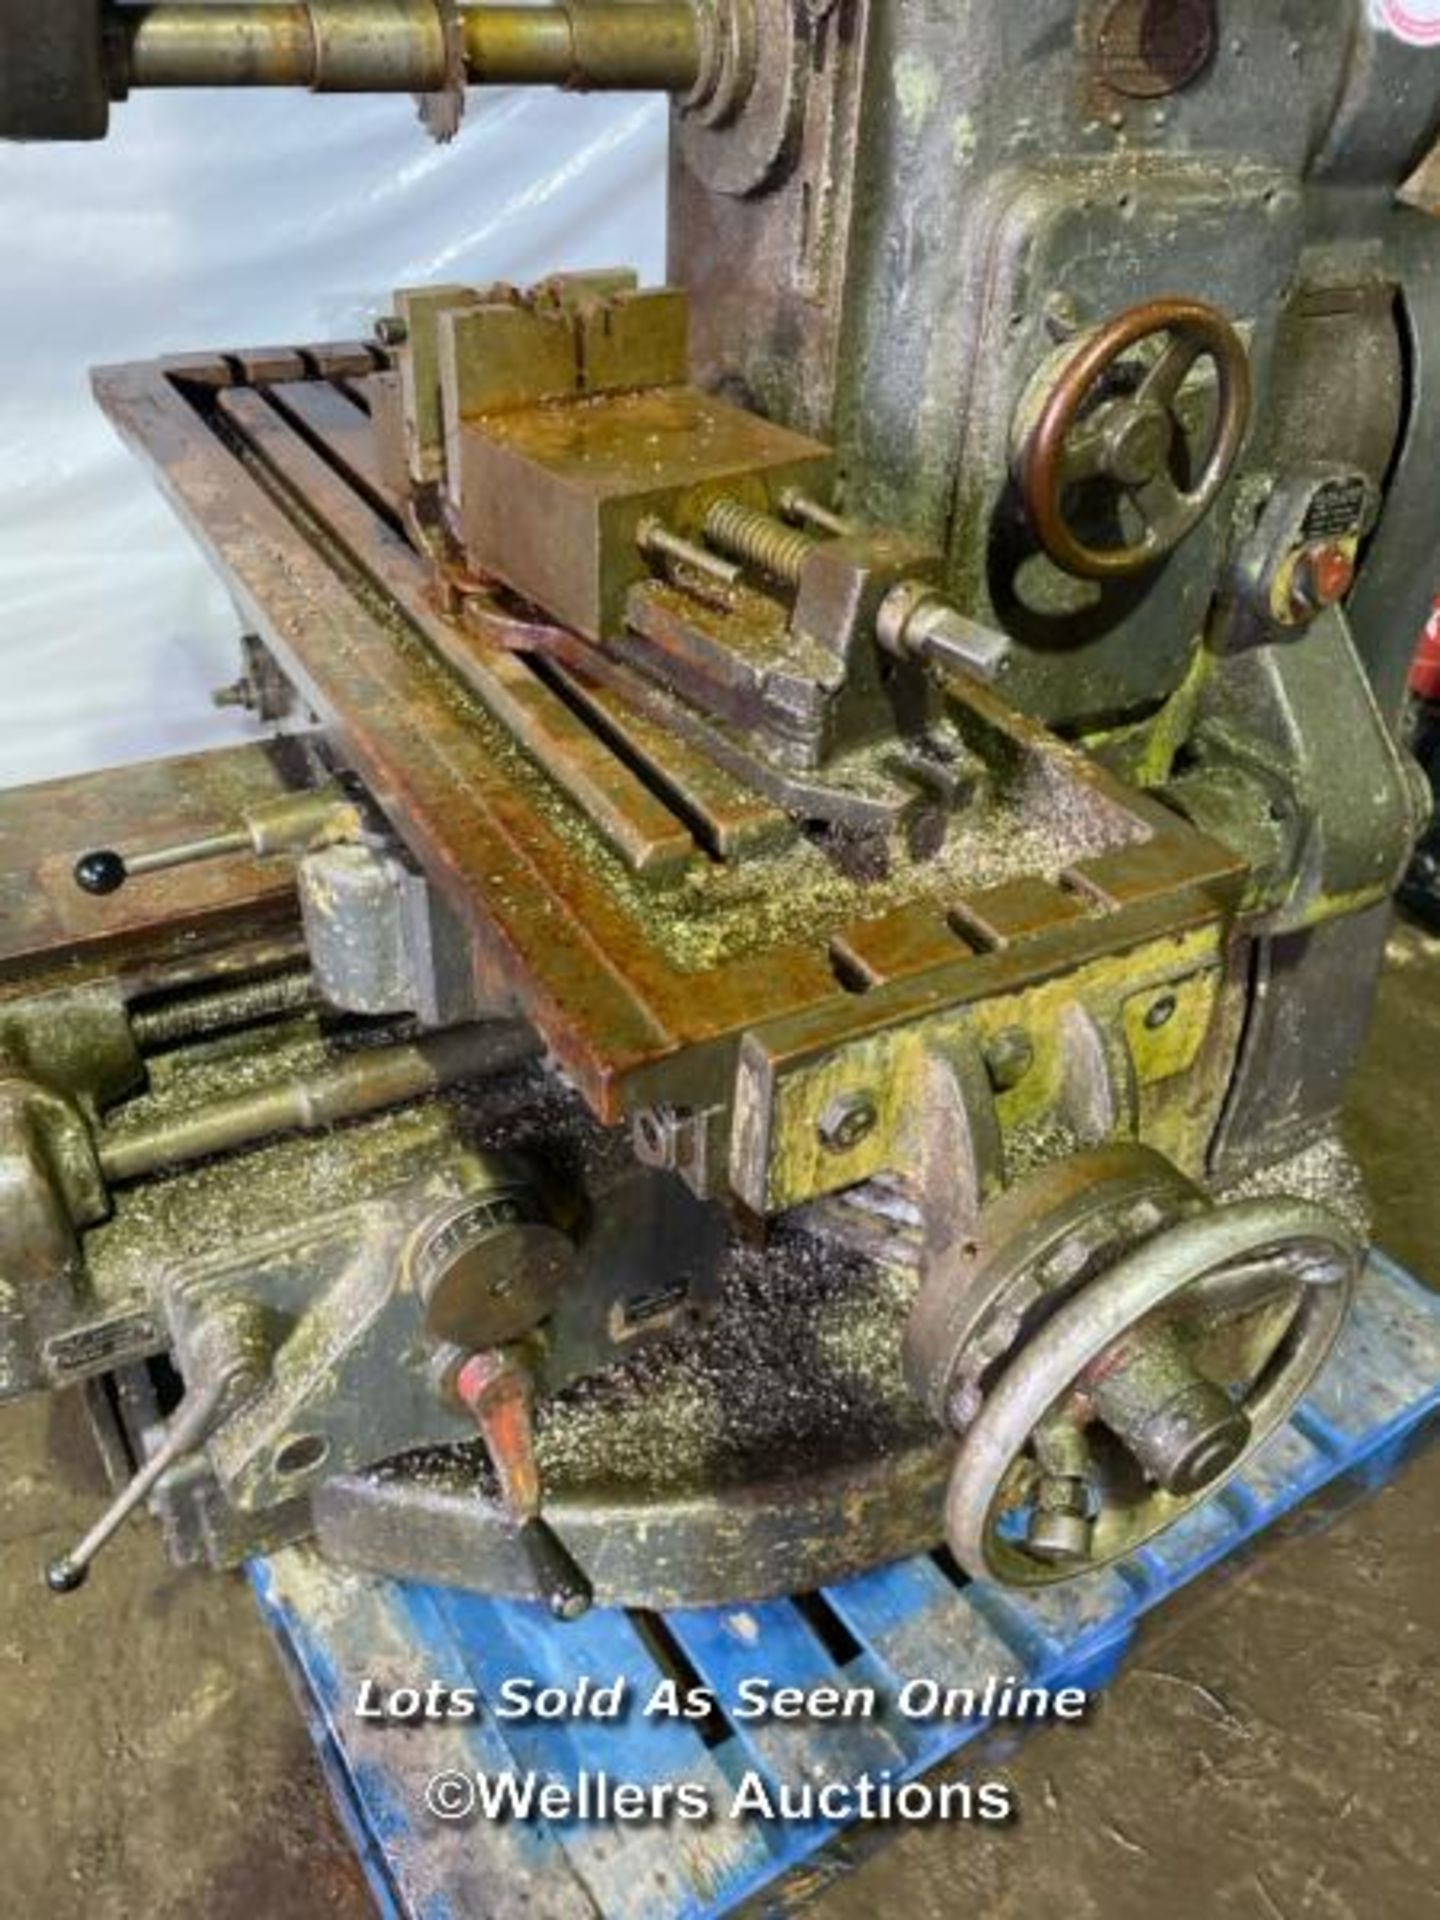 VINTAGE ALFRED HERBERT LTD. HORIZONTAL MILL, WITH VICE, IN WORKING ORDER - Image 2 of 10